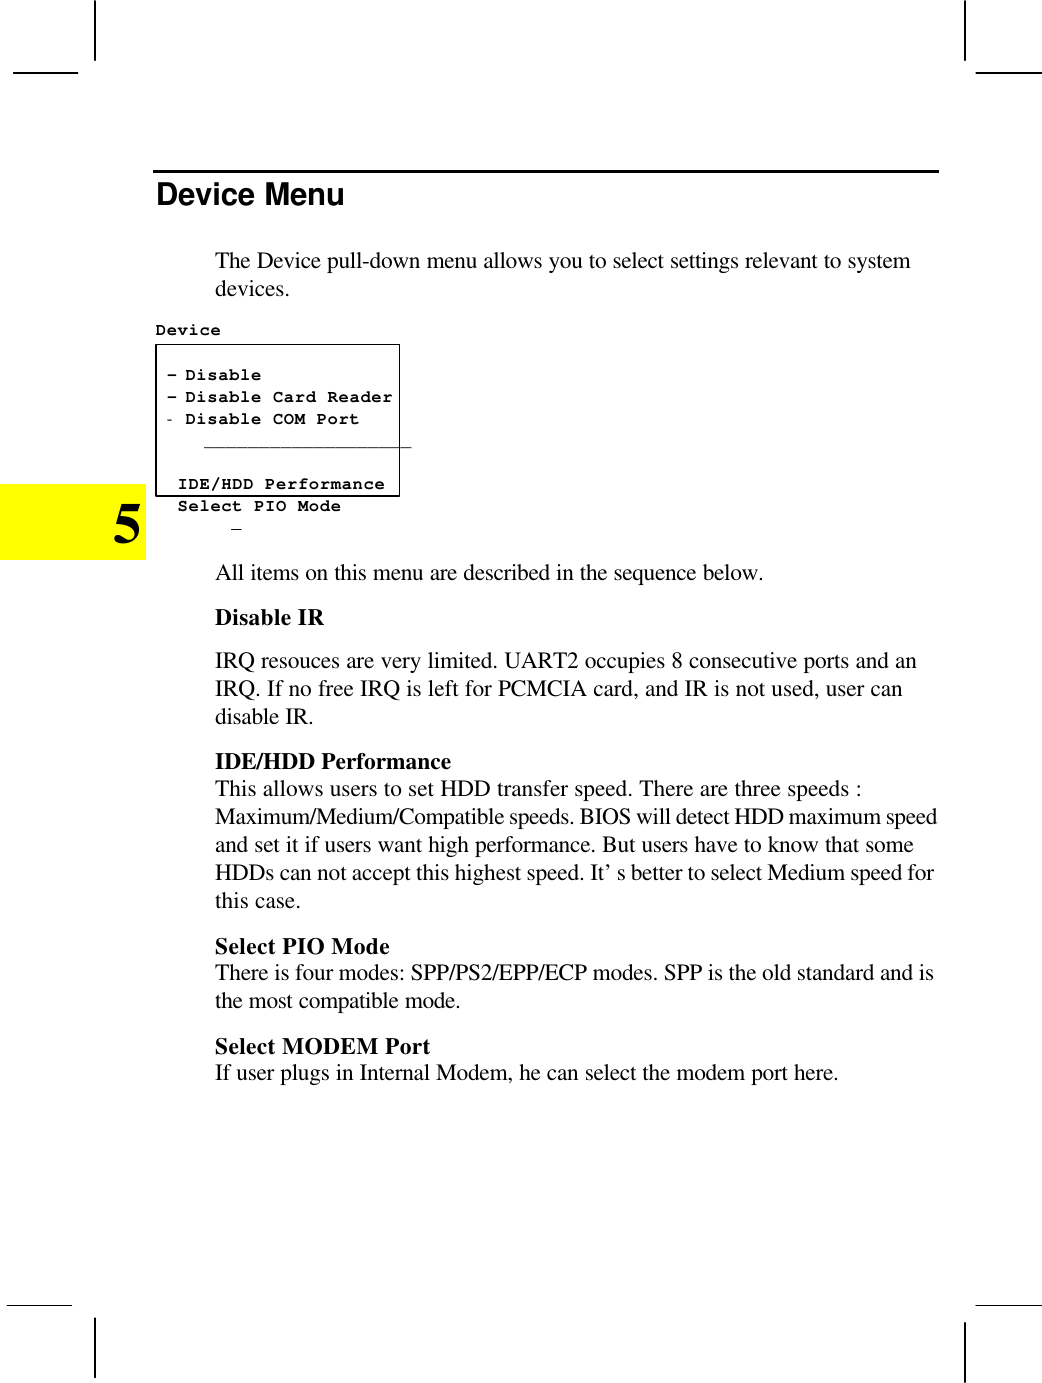 5Device MenuThe Device pull-down menu allows you to select settings relevant to systemdevices.Device - Disable - Disable Card Reader- Disable COM Port___________________    IDE/HDD Performance  Select PIO Mode -All items on this menu are described in the sequence below.Disable IRIRQ resouces are very limited. UART2 occupies 8 consecutive ports and anIRQ. If no free IRQ is left for PCMCIA card, and IR is not used, user candisable IR.IDE/HDD PerformanceThis allows users to set HDD transfer speed. There are three speeds :Maximum/Medium/Compatible speeds. BIOS will detect HDD maximum speedand set it if users want high performance. But users have to know that someHDDs can not accept this highest speed. It’s better to select Medium speed forthis case.Select PIO ModeThere is four modes: SPP/PS2/EPP/ECP modes. SPP is the old standard and isthe most compatible mode.Select MODEM PortIf user plugs in Internal Modem, he can select the modem port here.